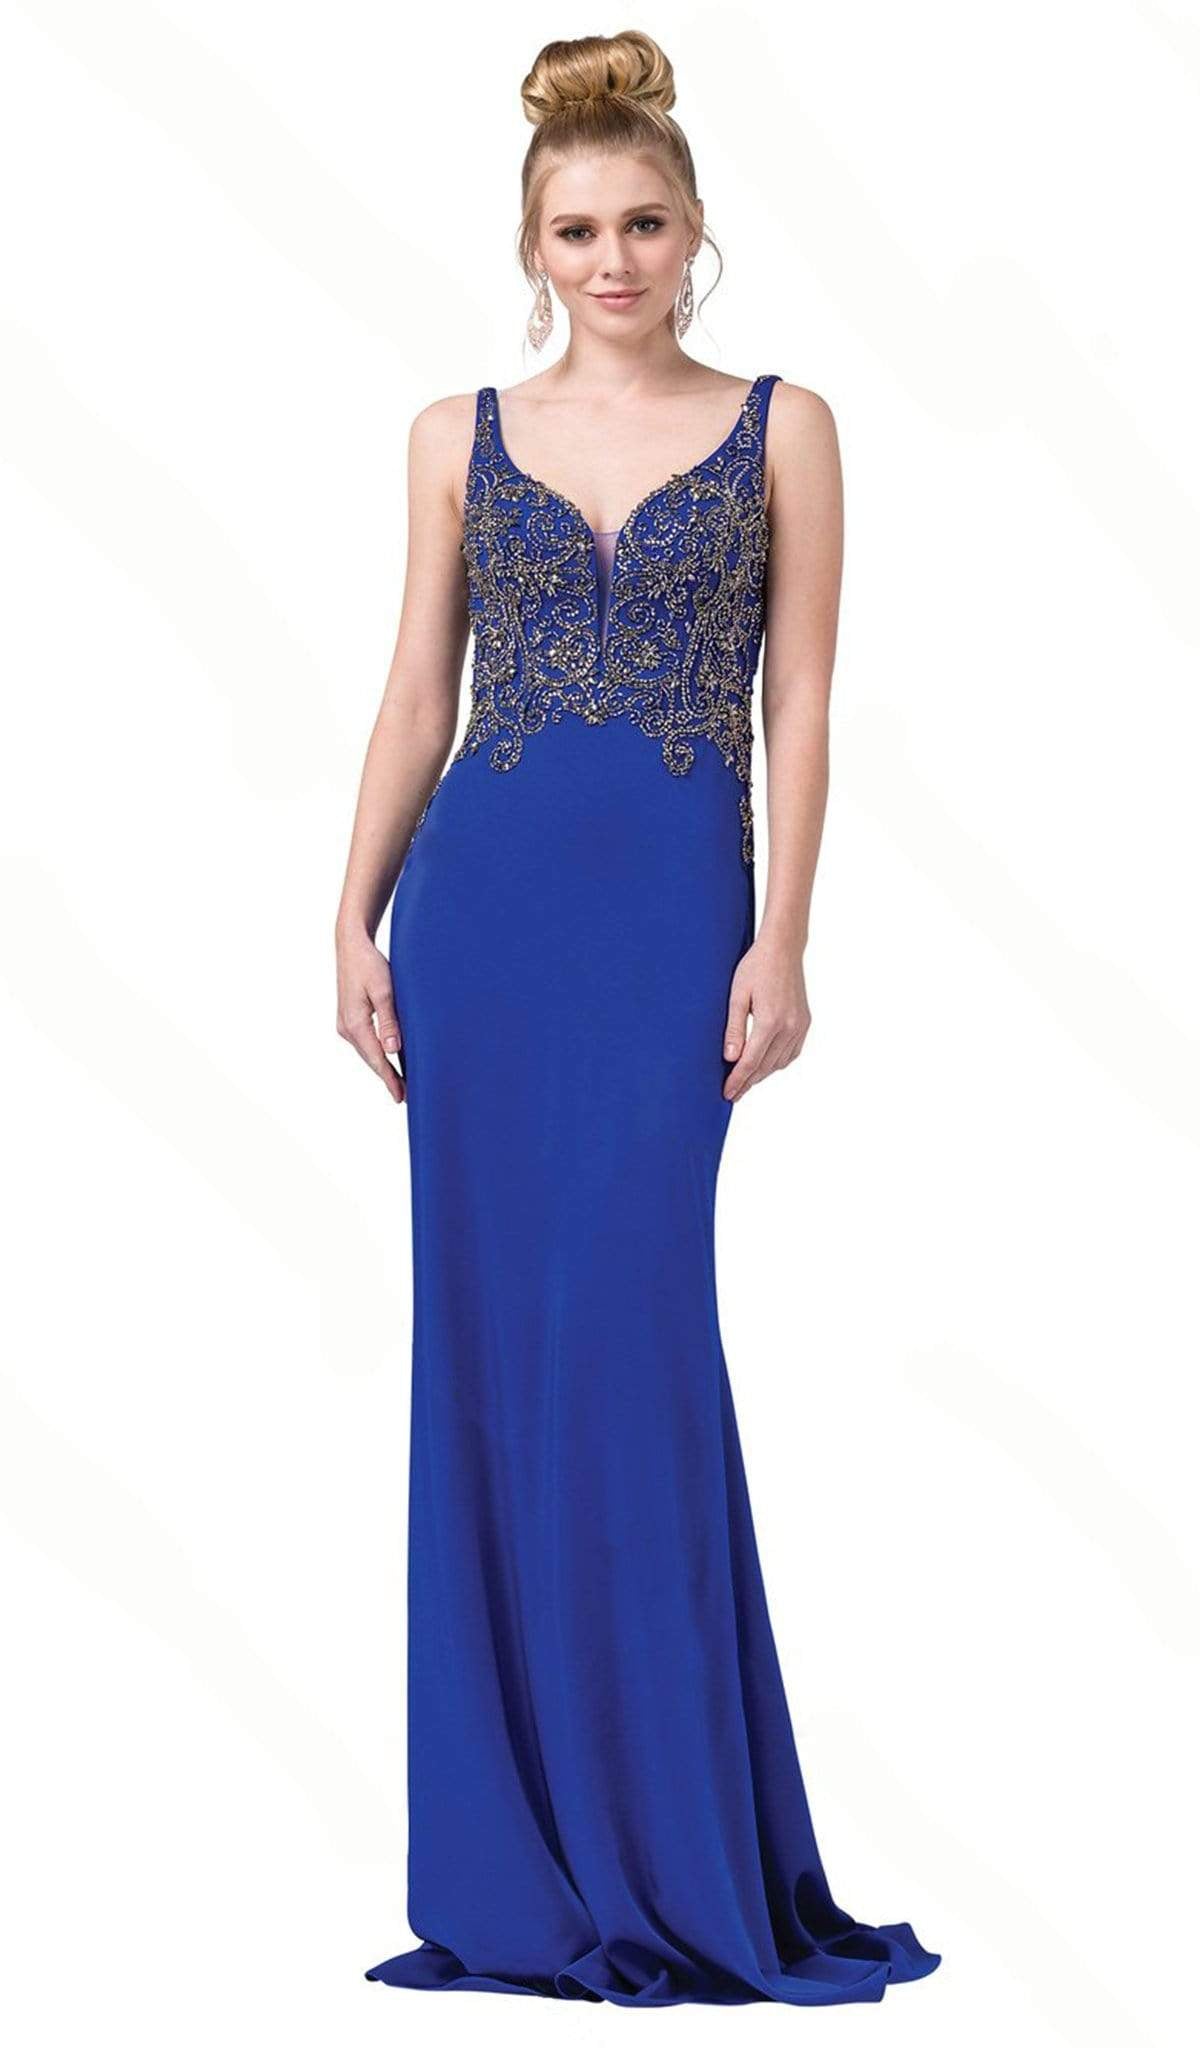 Image of Dancing Queen - 2819 Bead Embellished Plunging Prom Dress